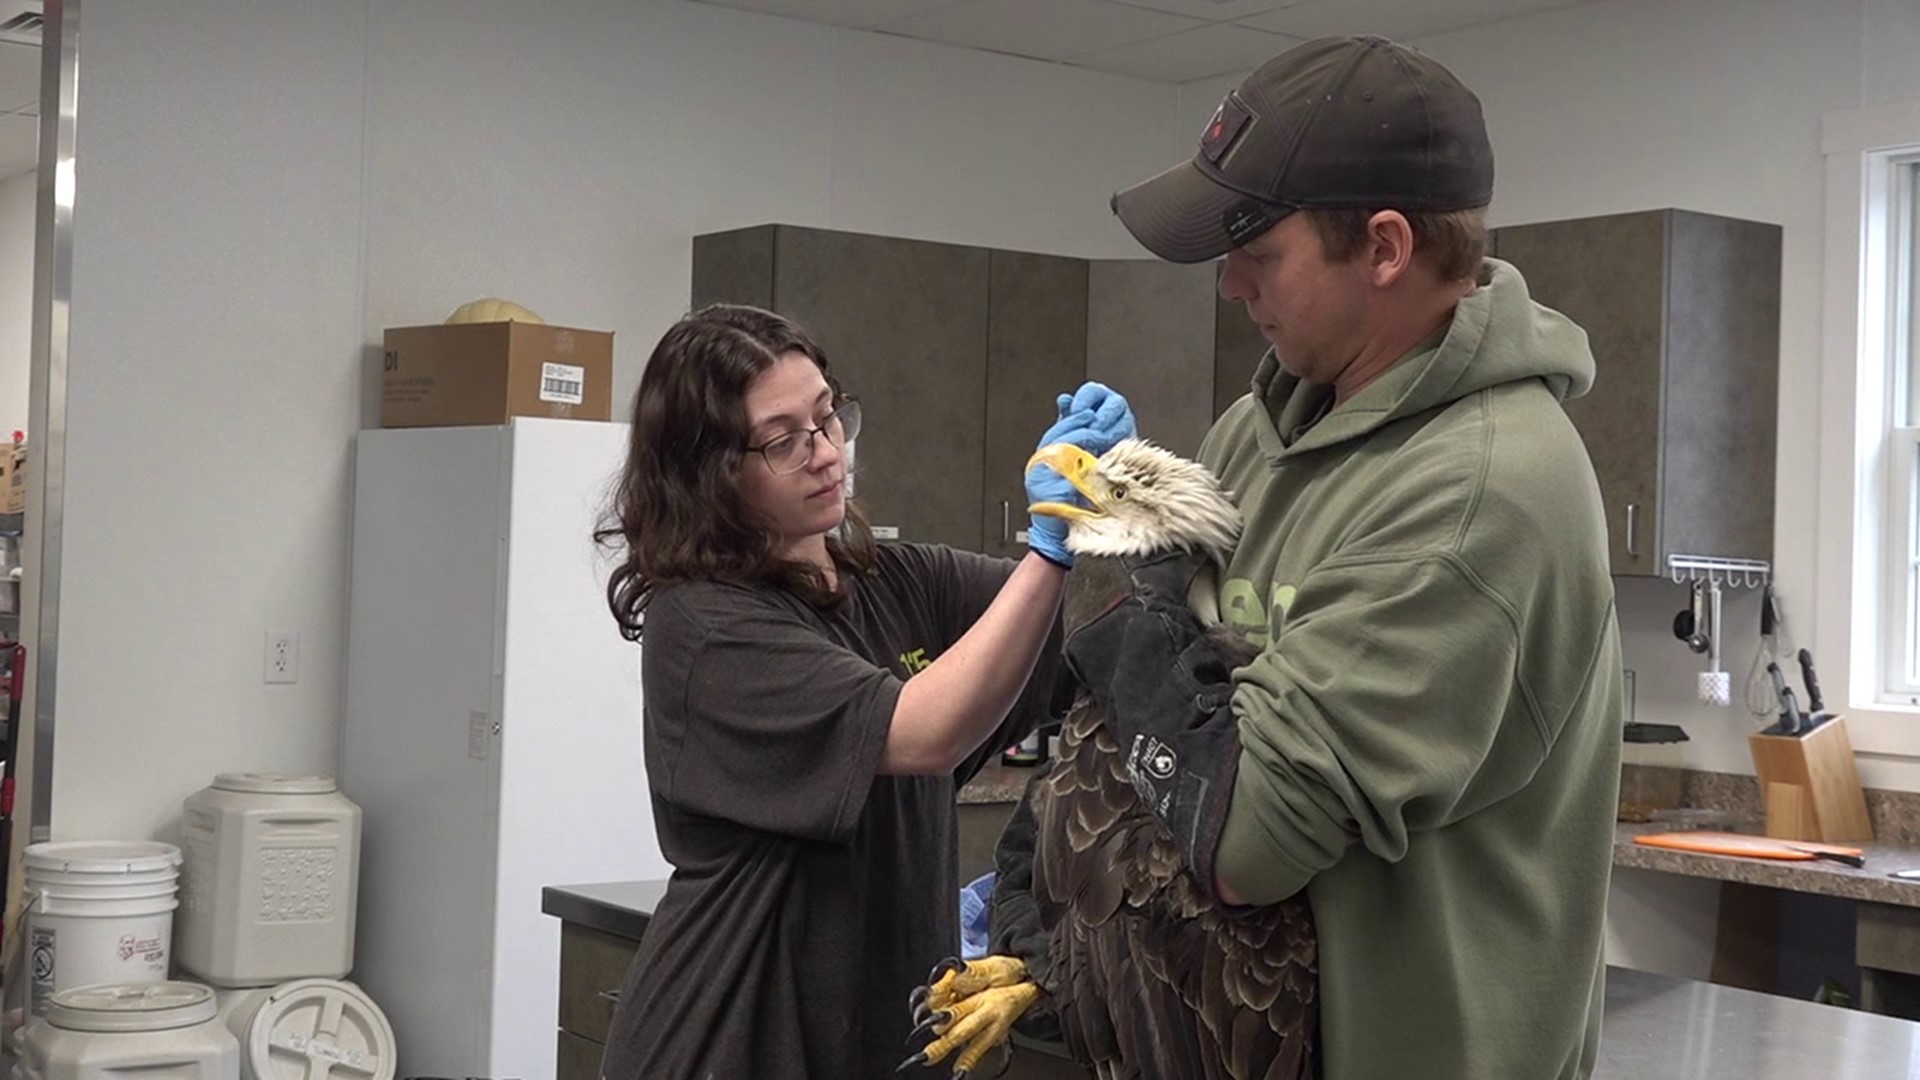 A wildlife center in Schuylkill County is caring for a bald eagle that tested positive for lead poisoning.